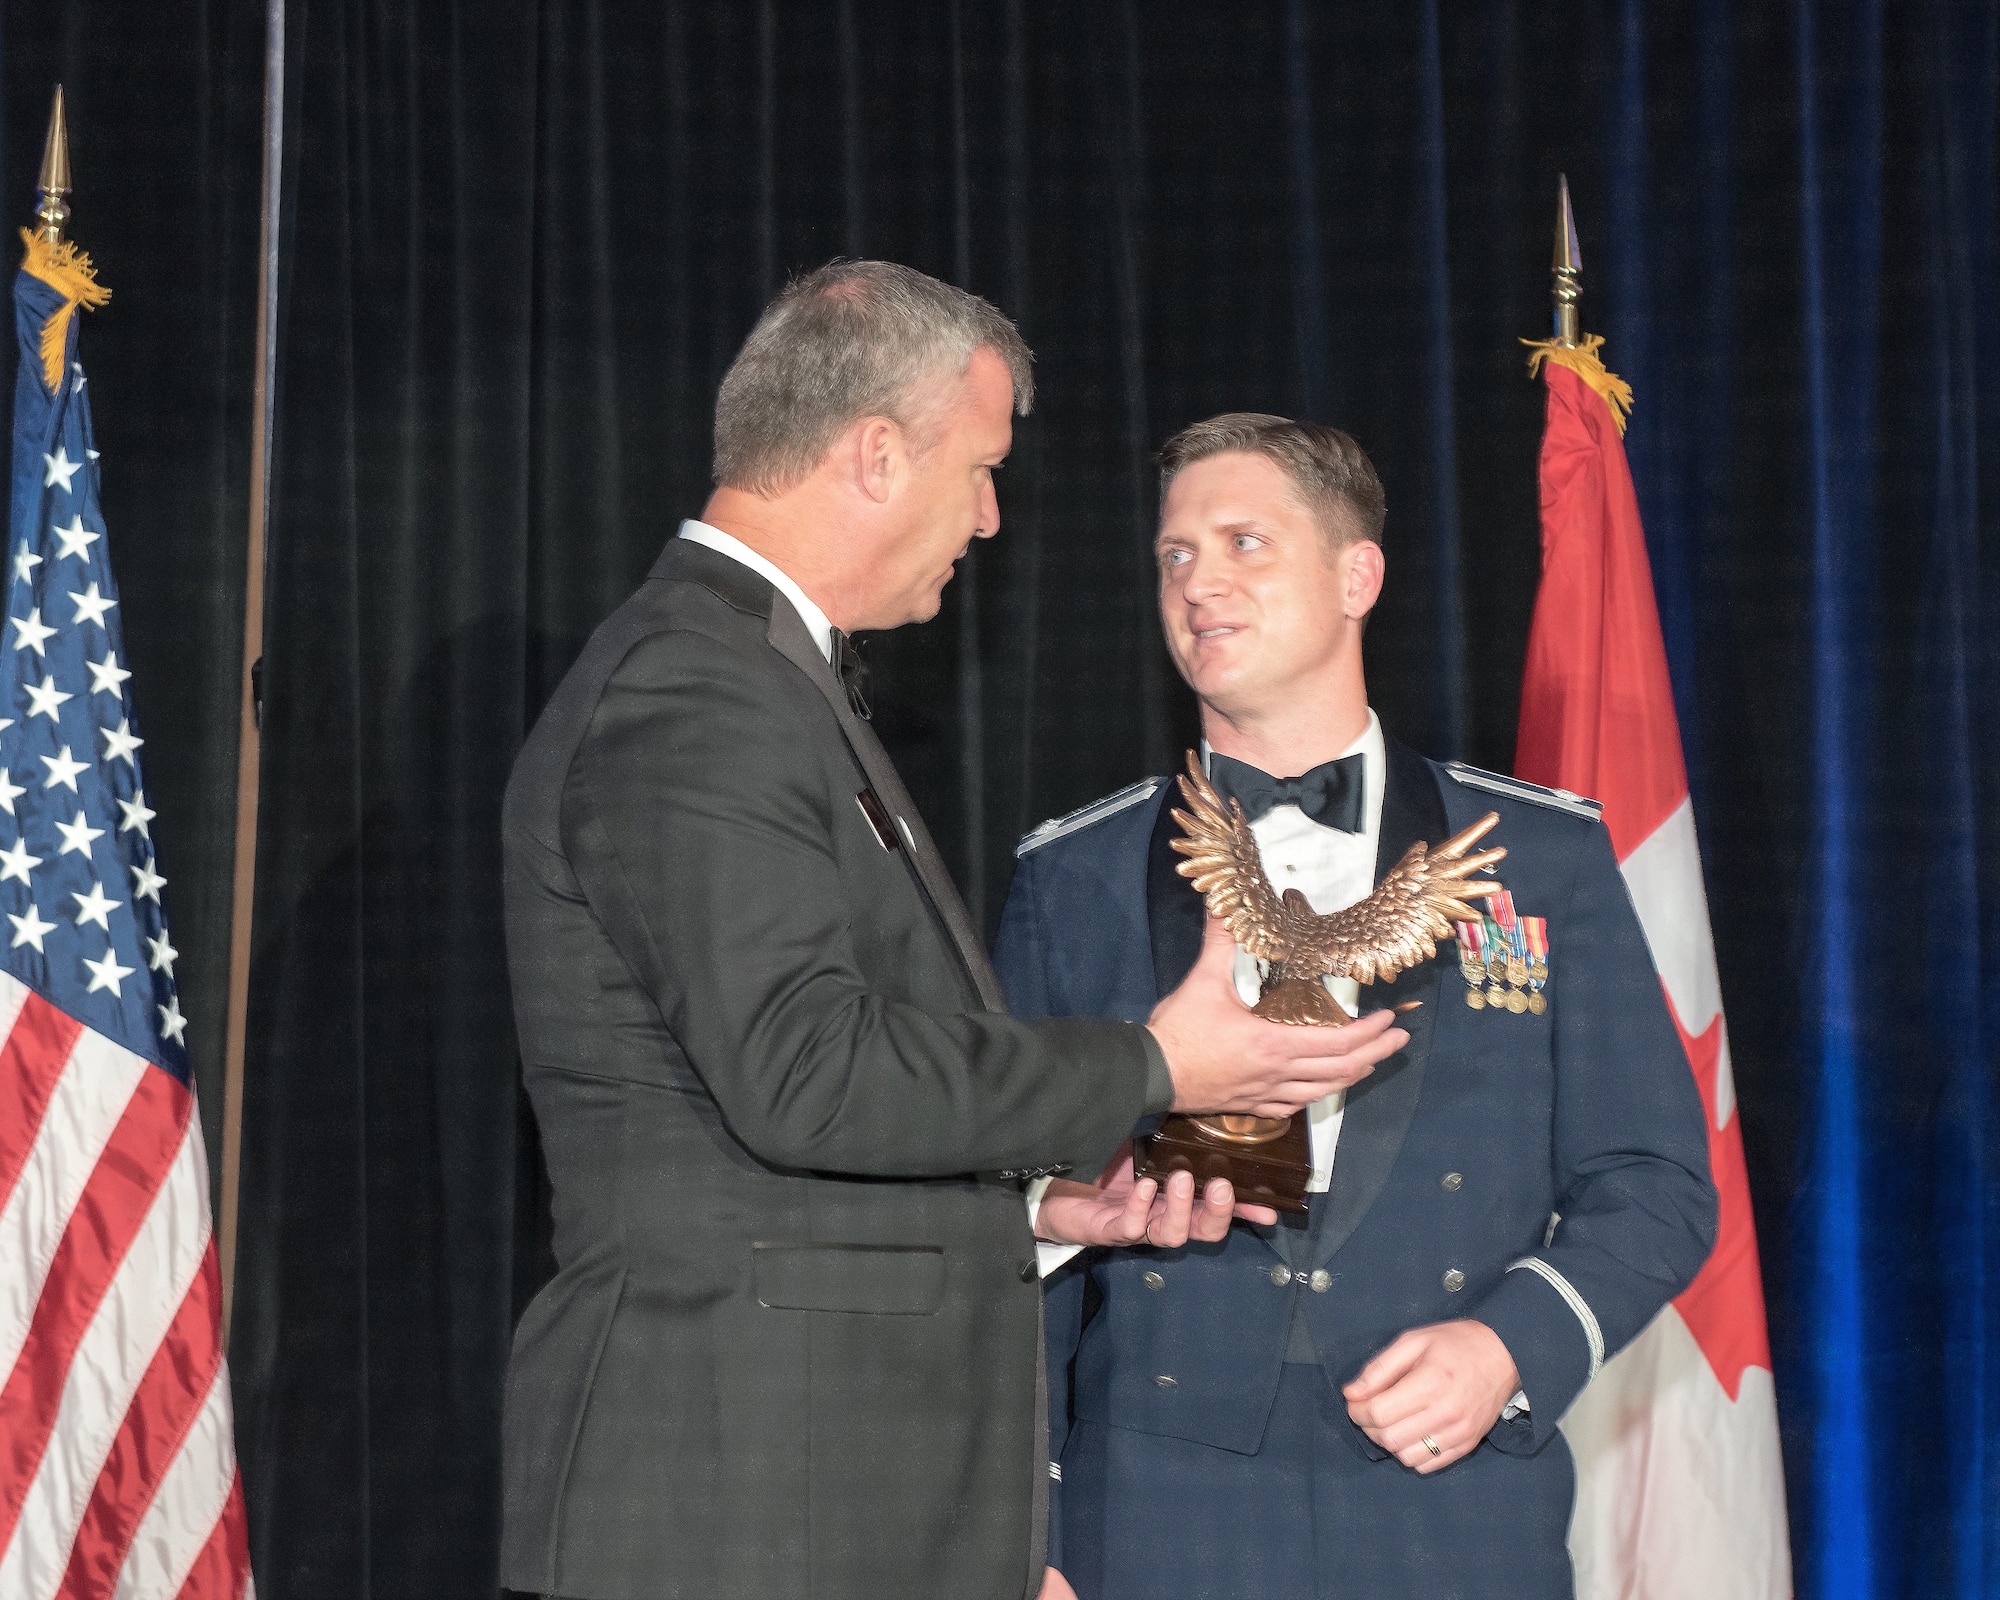 U.S. Air Force Lt. Col. Jared Clay (right), Chief Surgeon, Air Force Academy, Colorado, received the Patriot Award at the annual National Defense Industrial Association’s ball, sponsored by the association’s Rocky Mountain Chapter, Nov. 2, 2018. Clay was honored for his actions in Afghanistan earlier this year. (Courtesy photo)